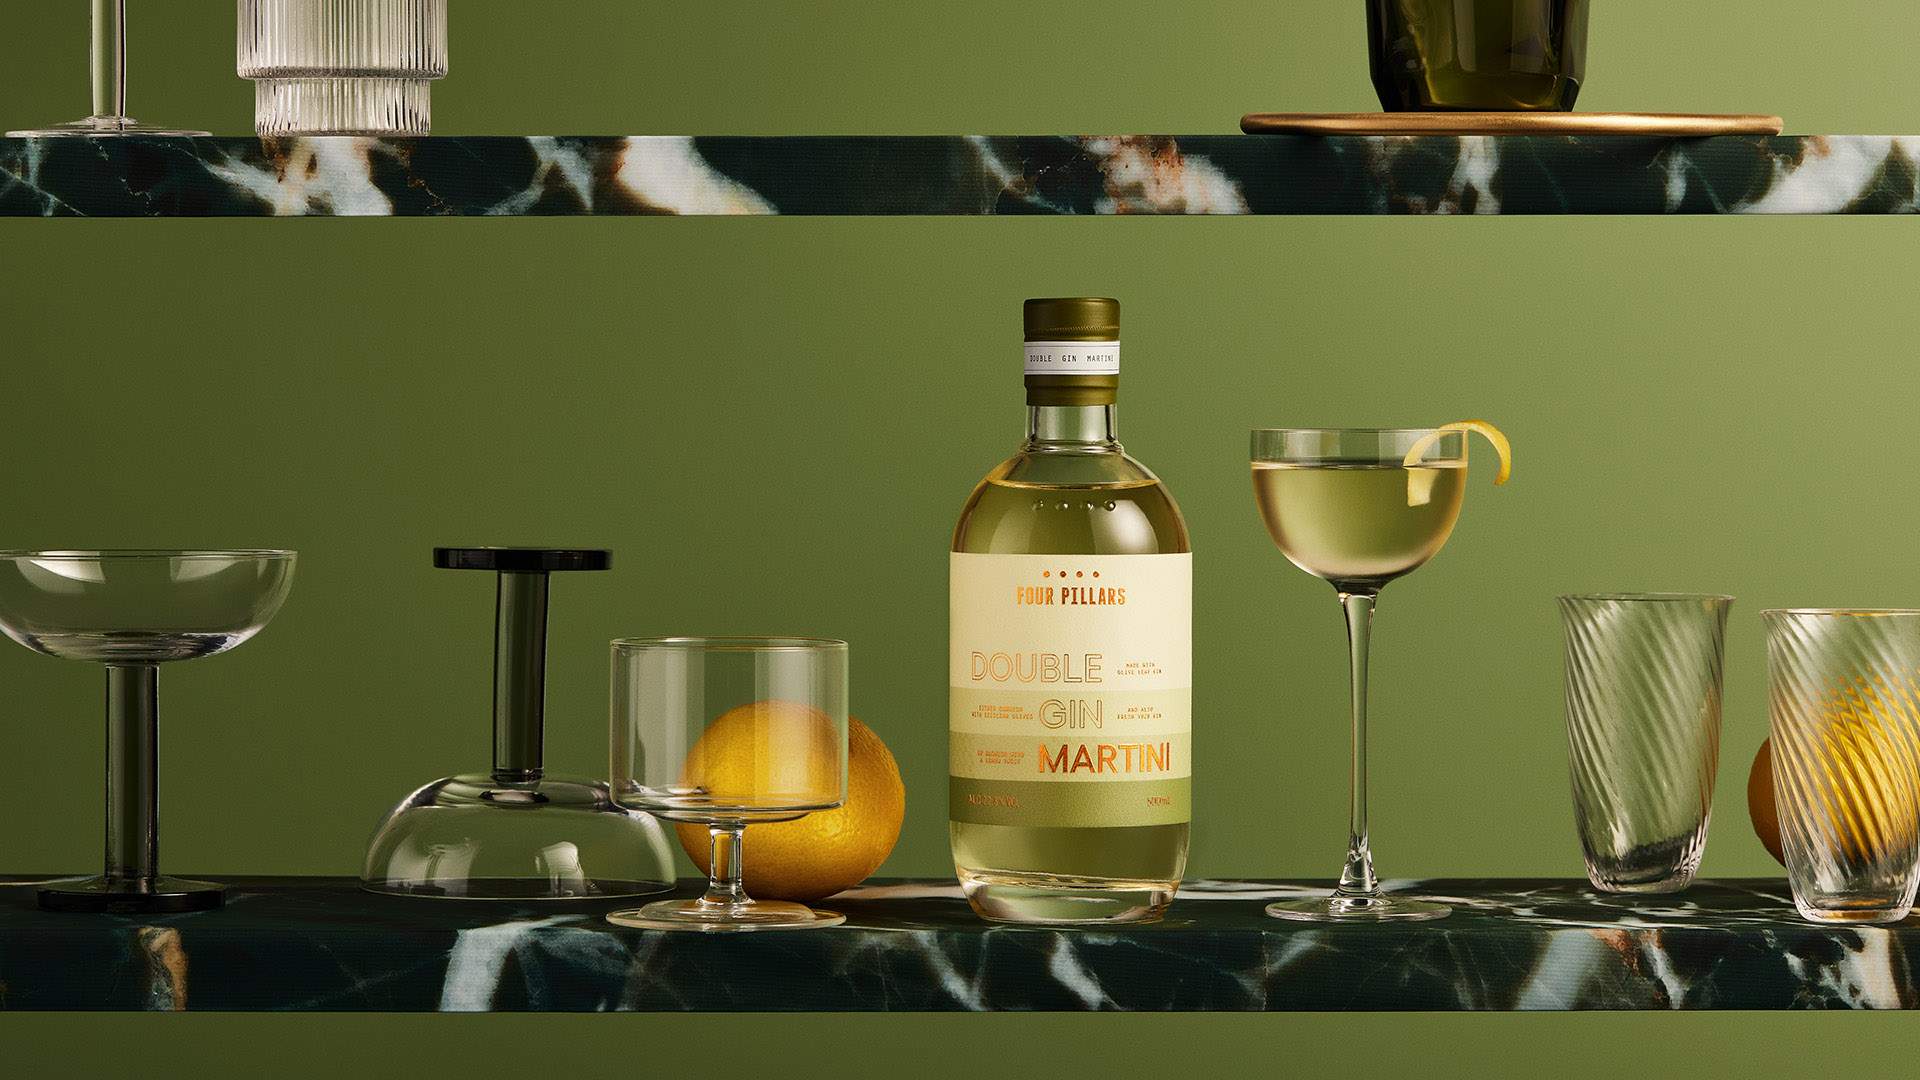 Just Add Olives: Four Pillars Has Released a Ready-to-Pour Double Gin Martini in a Bottle